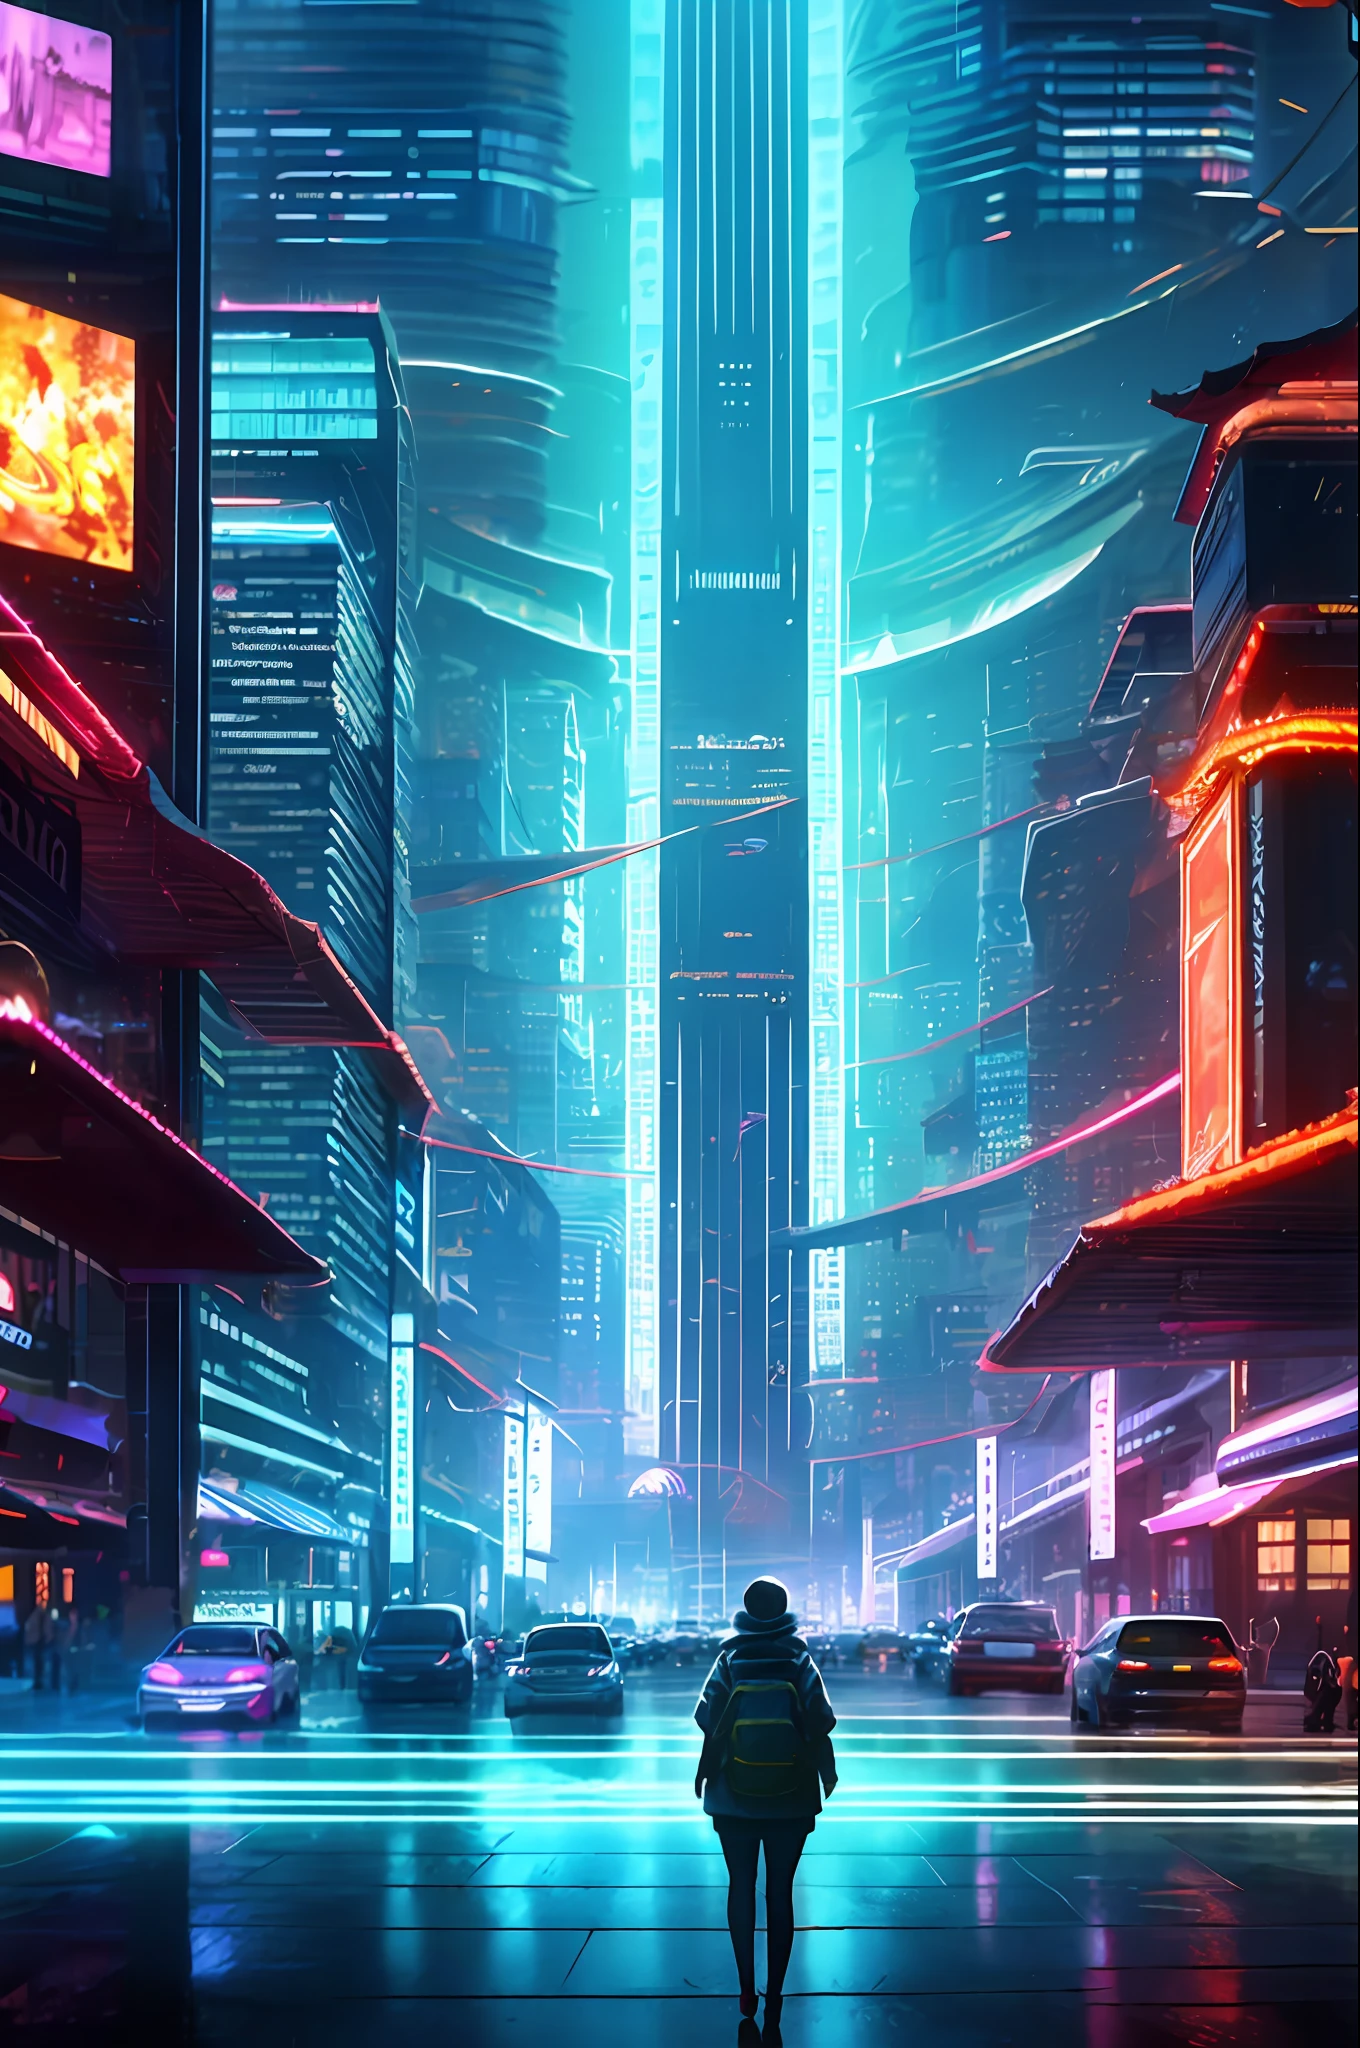 Style: Concept art. The scene: Futuristic cityscapes with towering skyscrapers and sleek aerodynamic vehicles speeding through the air. High-resolution OLED GUI interfaces in the building&#39;s windows are filled with transparent data visualization infographics showing everything from weather patterns to traffic flow. Colors are saturated and vibrant, with warm pinks and purples dominating the skyline. The overall effect is both beautiful and awe-inspiring.